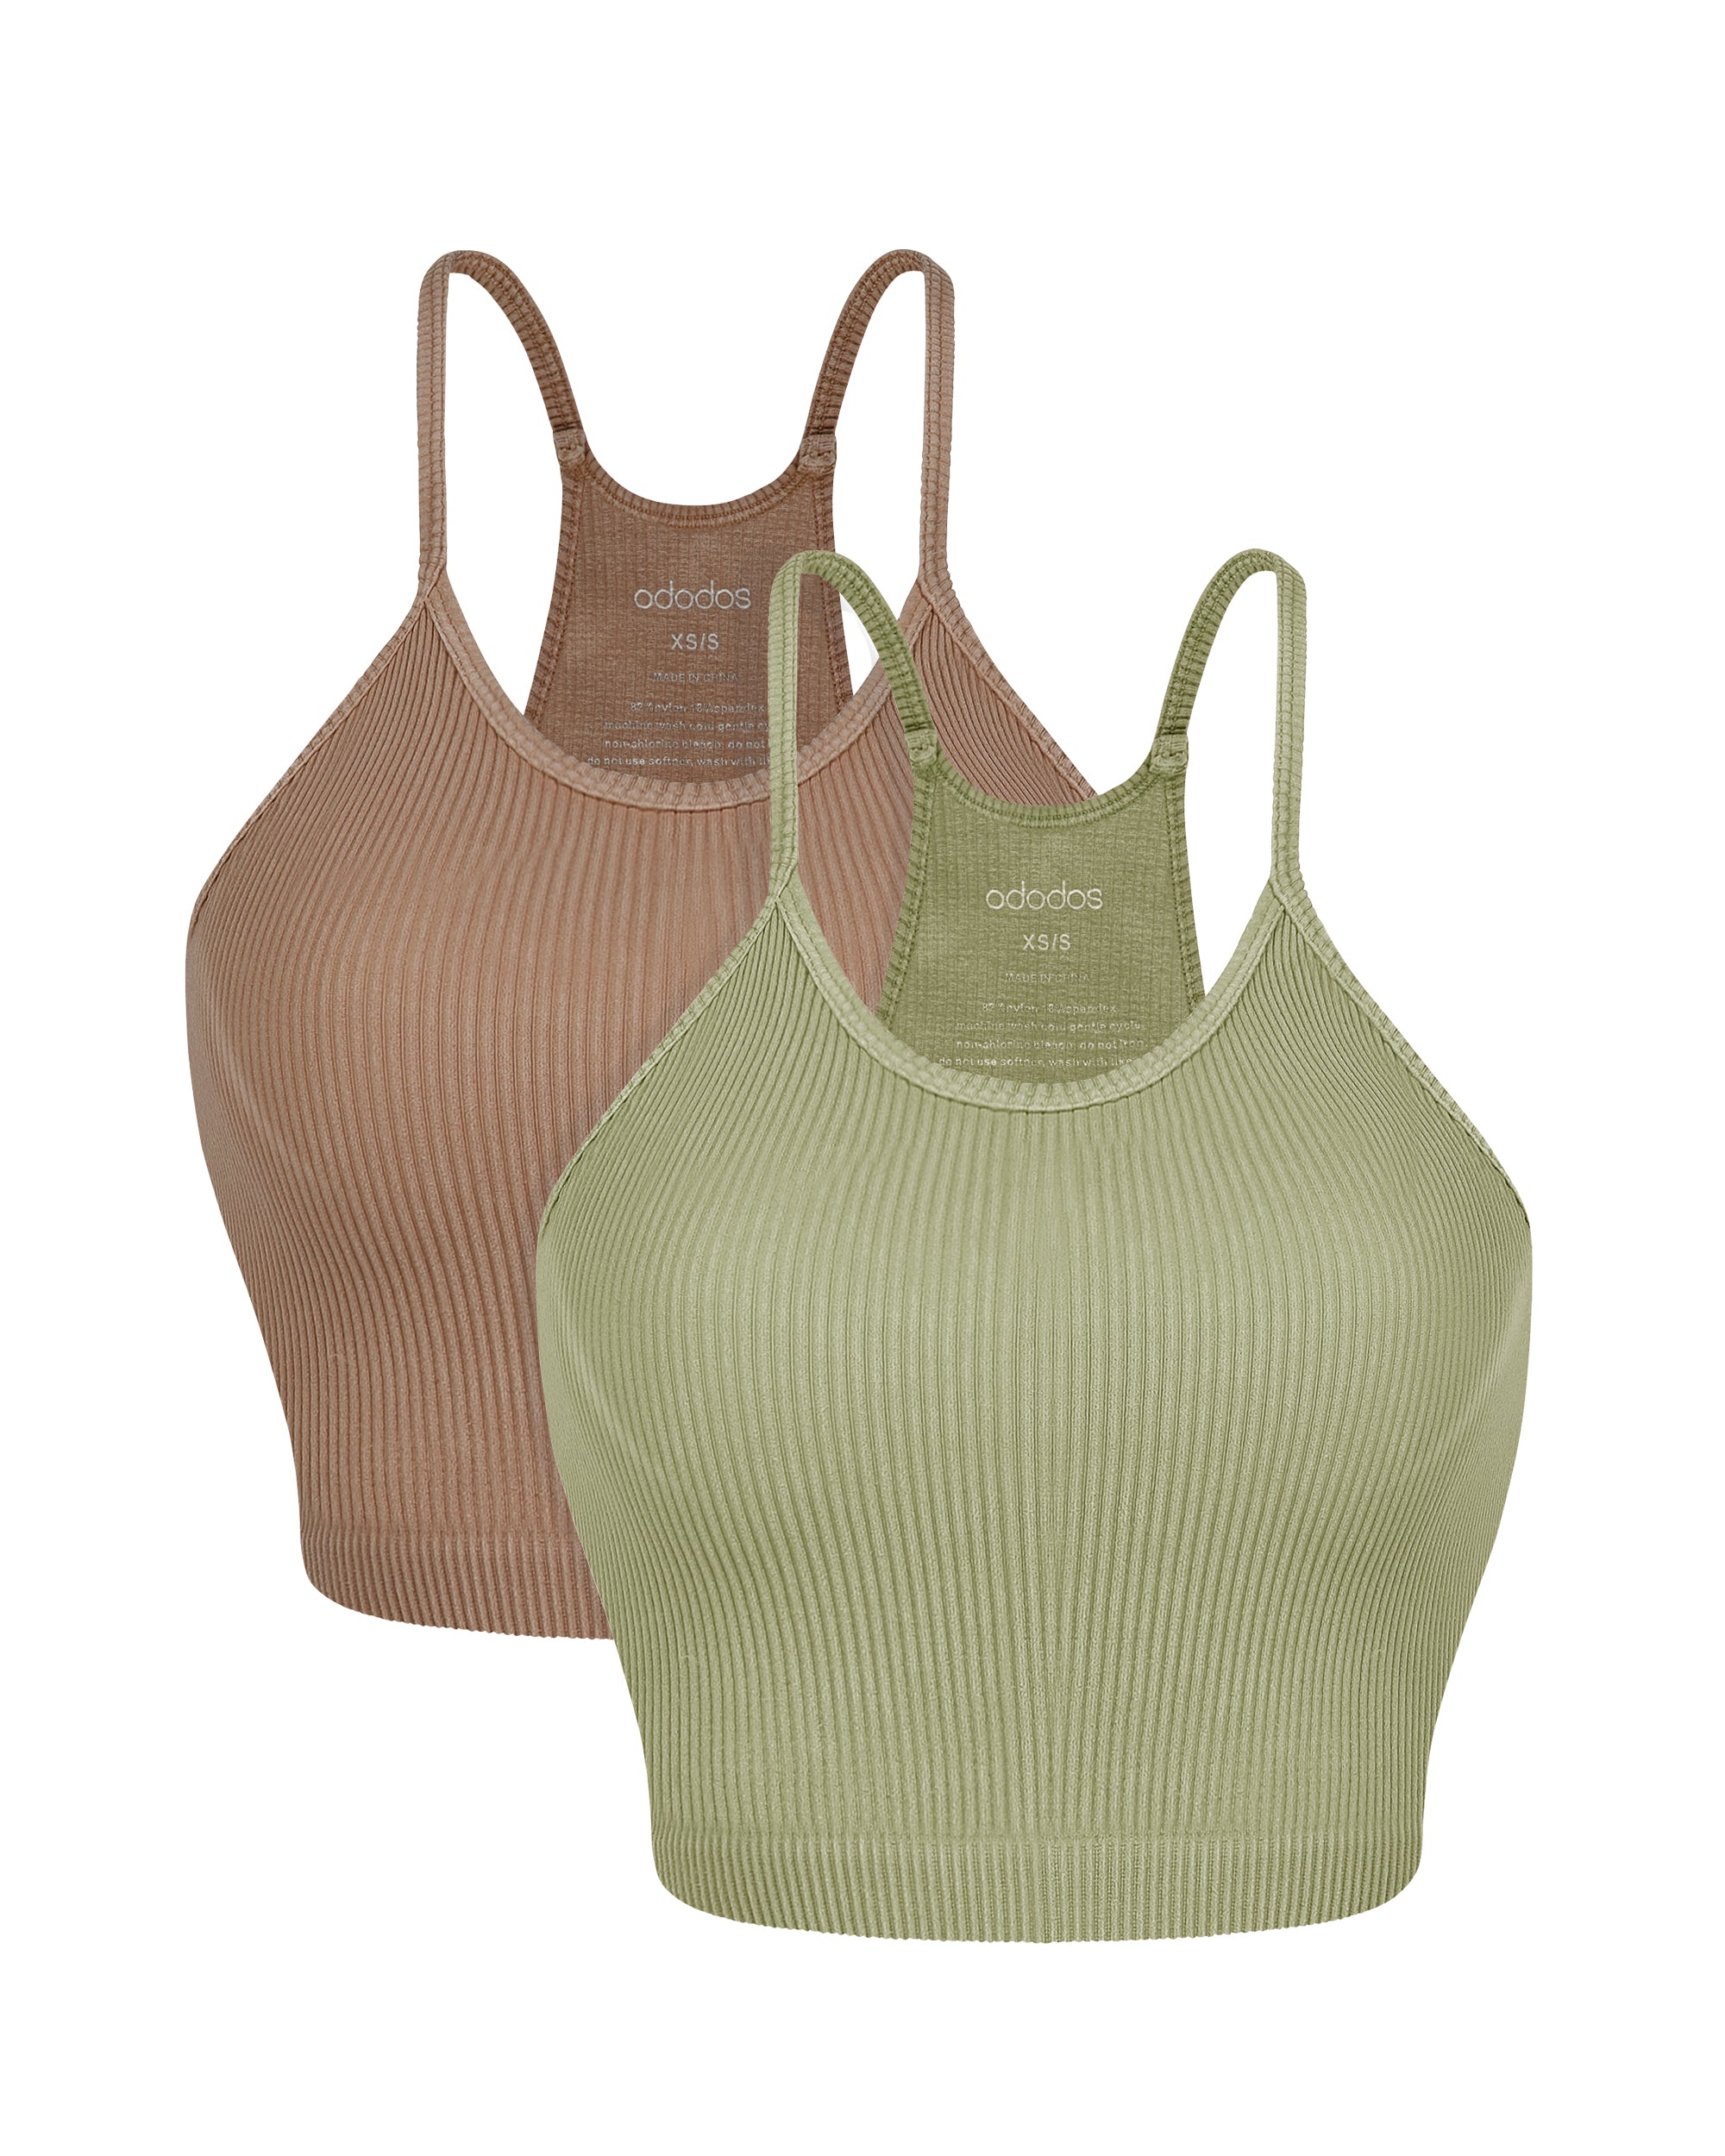 2-Pack Rib-Knit Crop Tank Tops Dusty Olive+Chocolate - ododos